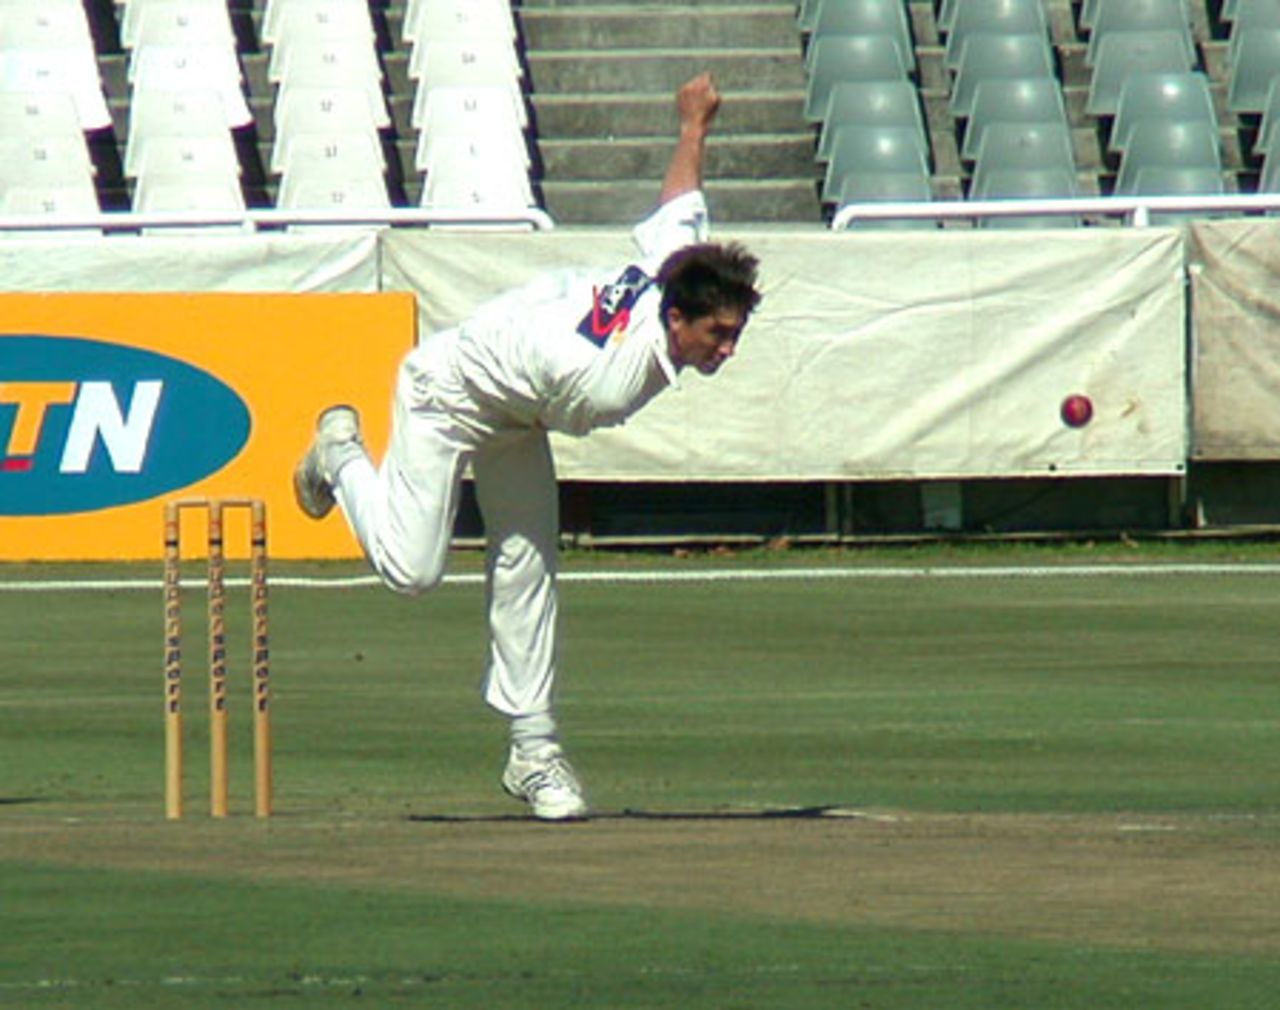 WP's Allan Dawson in full flight against KZN in a Supersport Series match at Newlands on Saturday